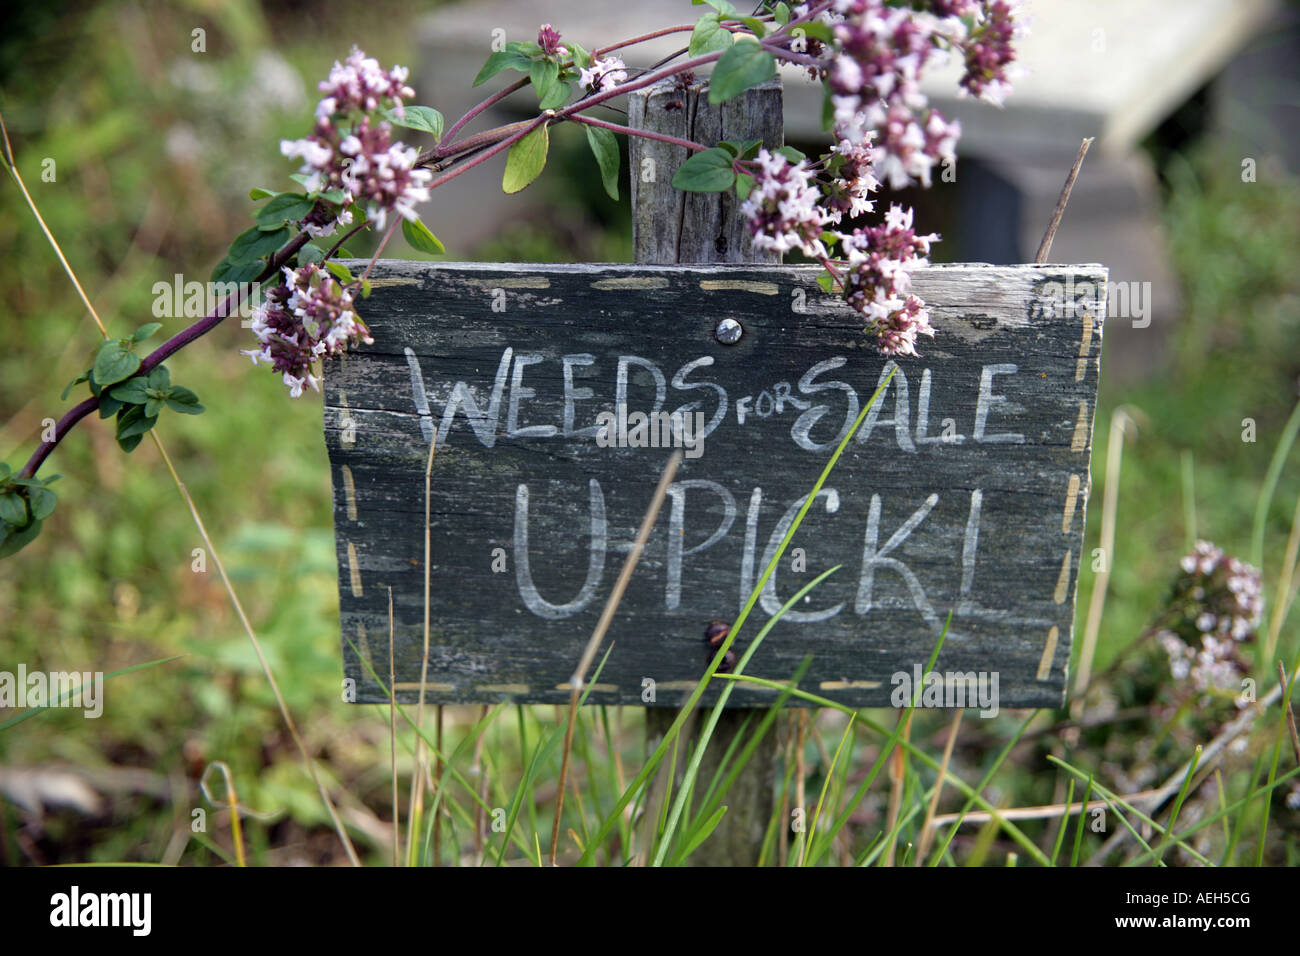 Weeds for Sale You Pick sign Stock Photo